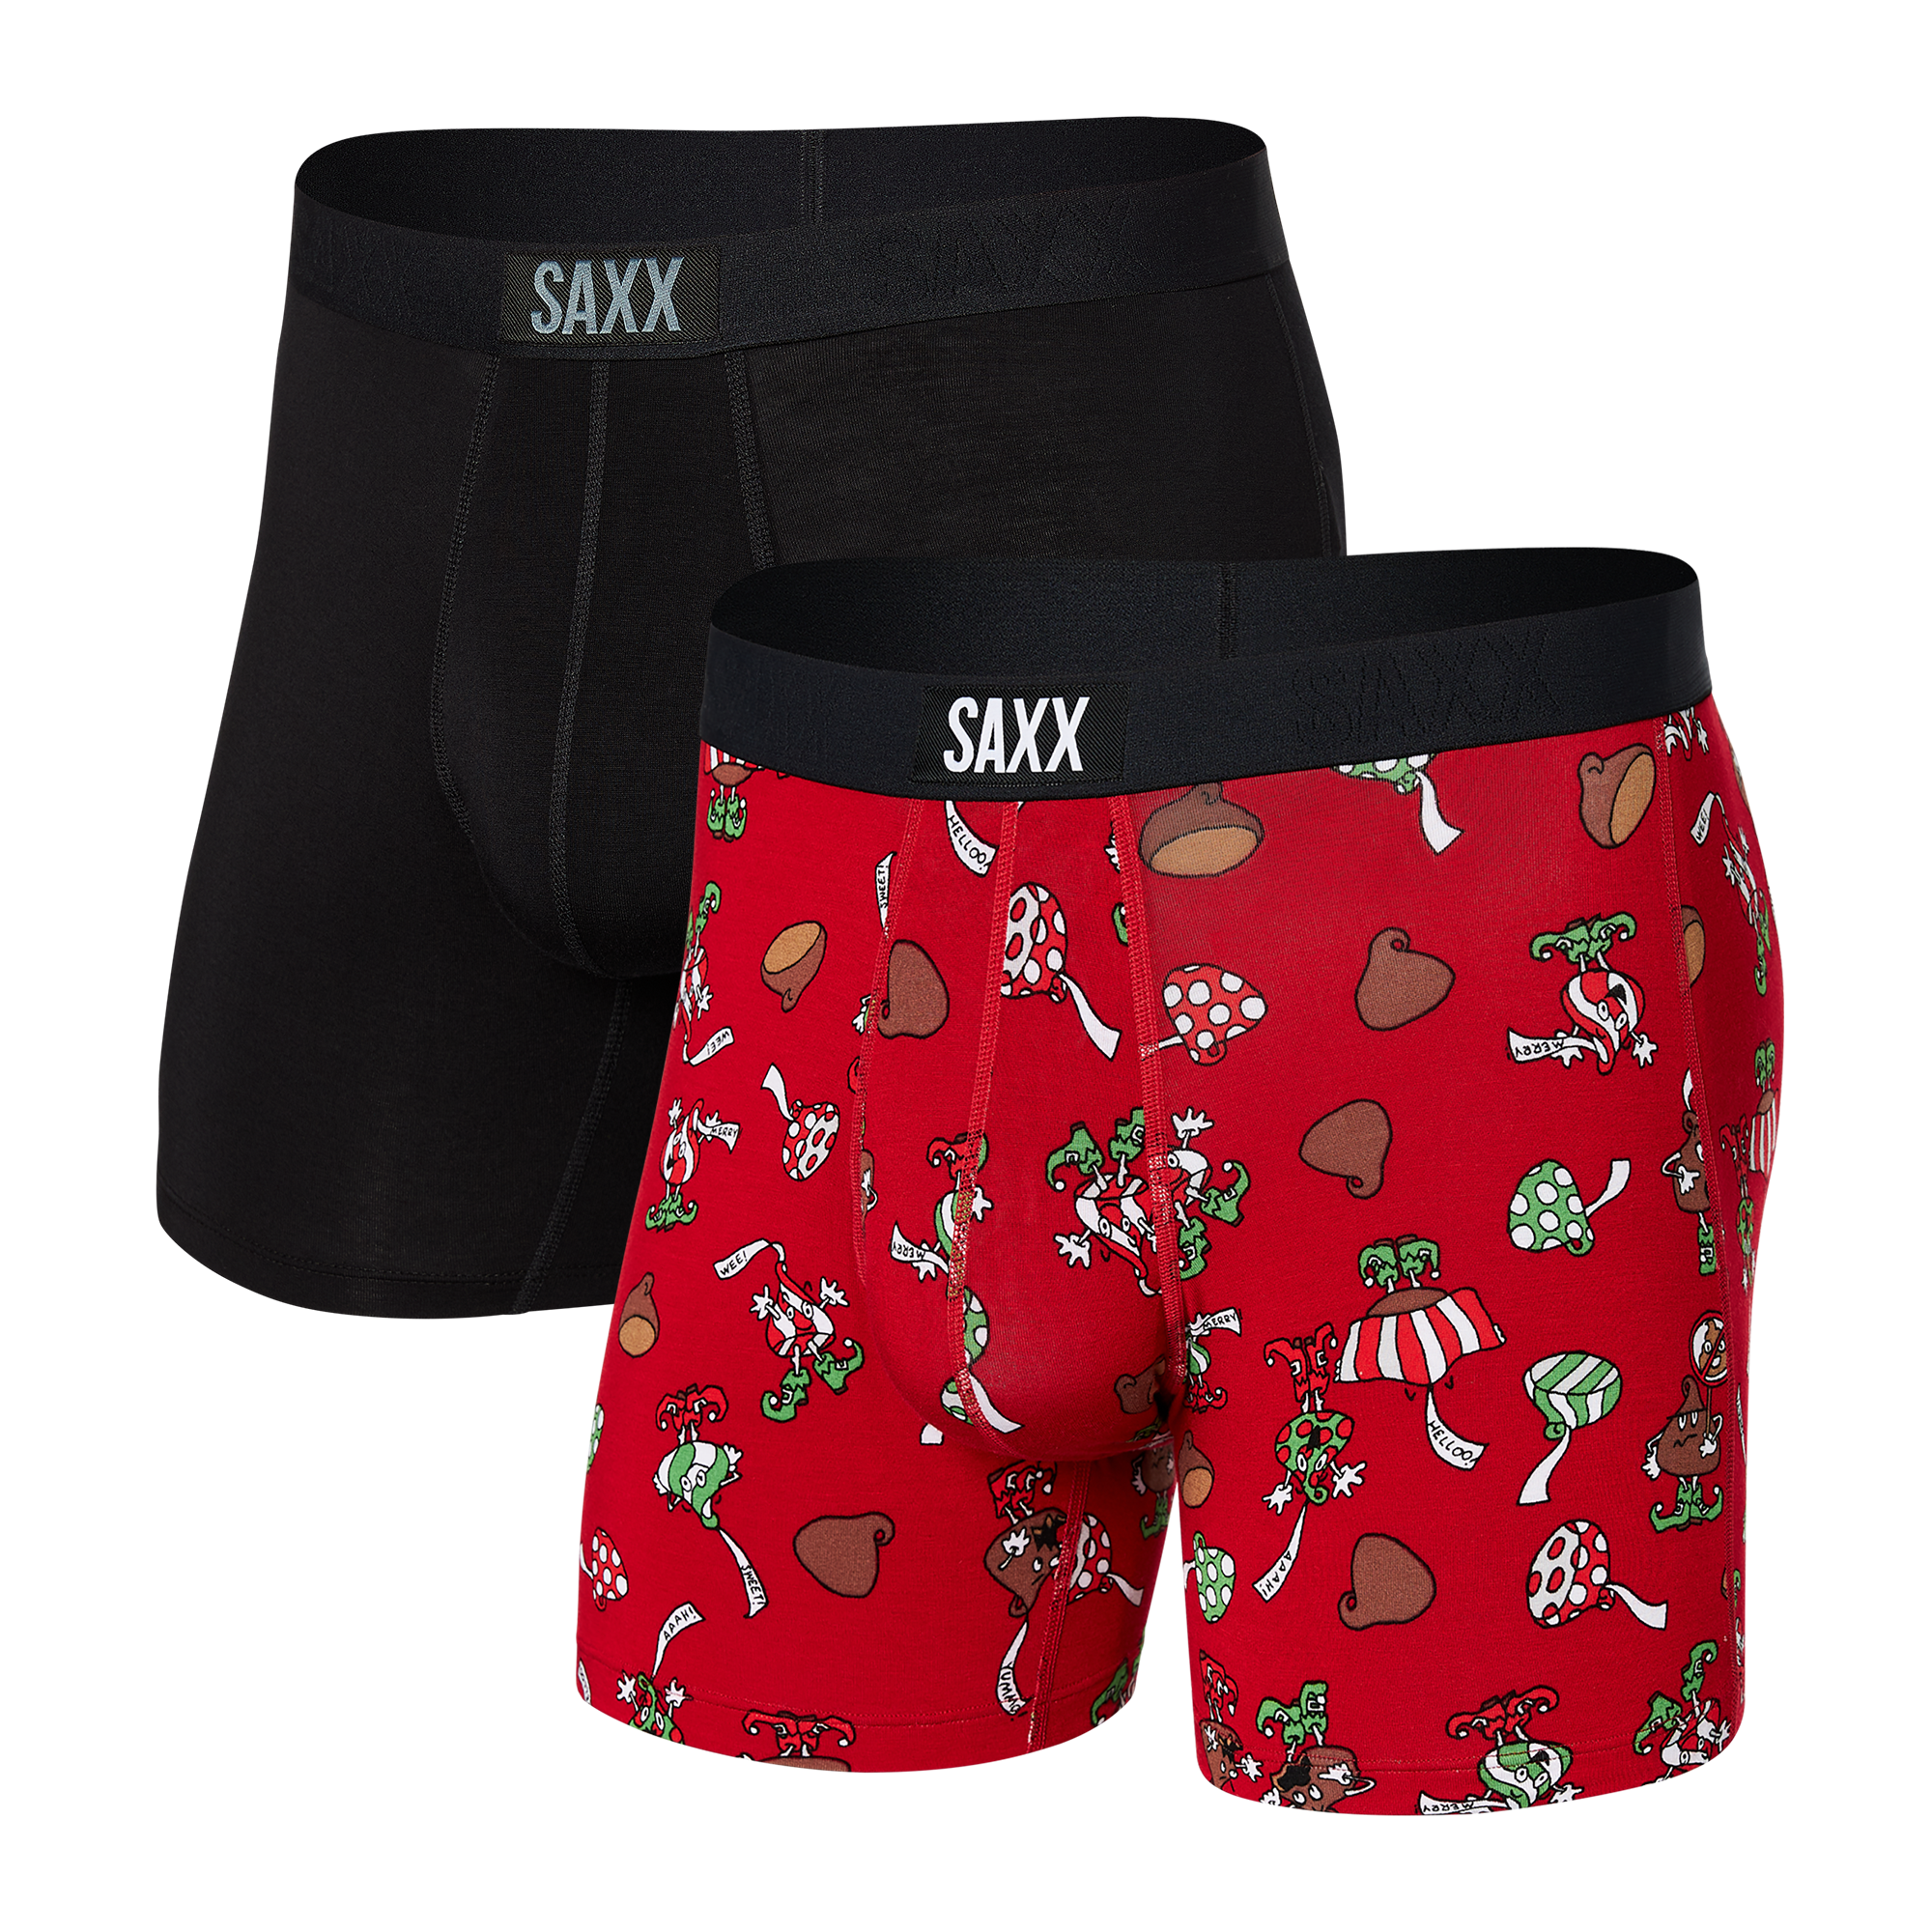 Snoopy Christmas boxers - Red